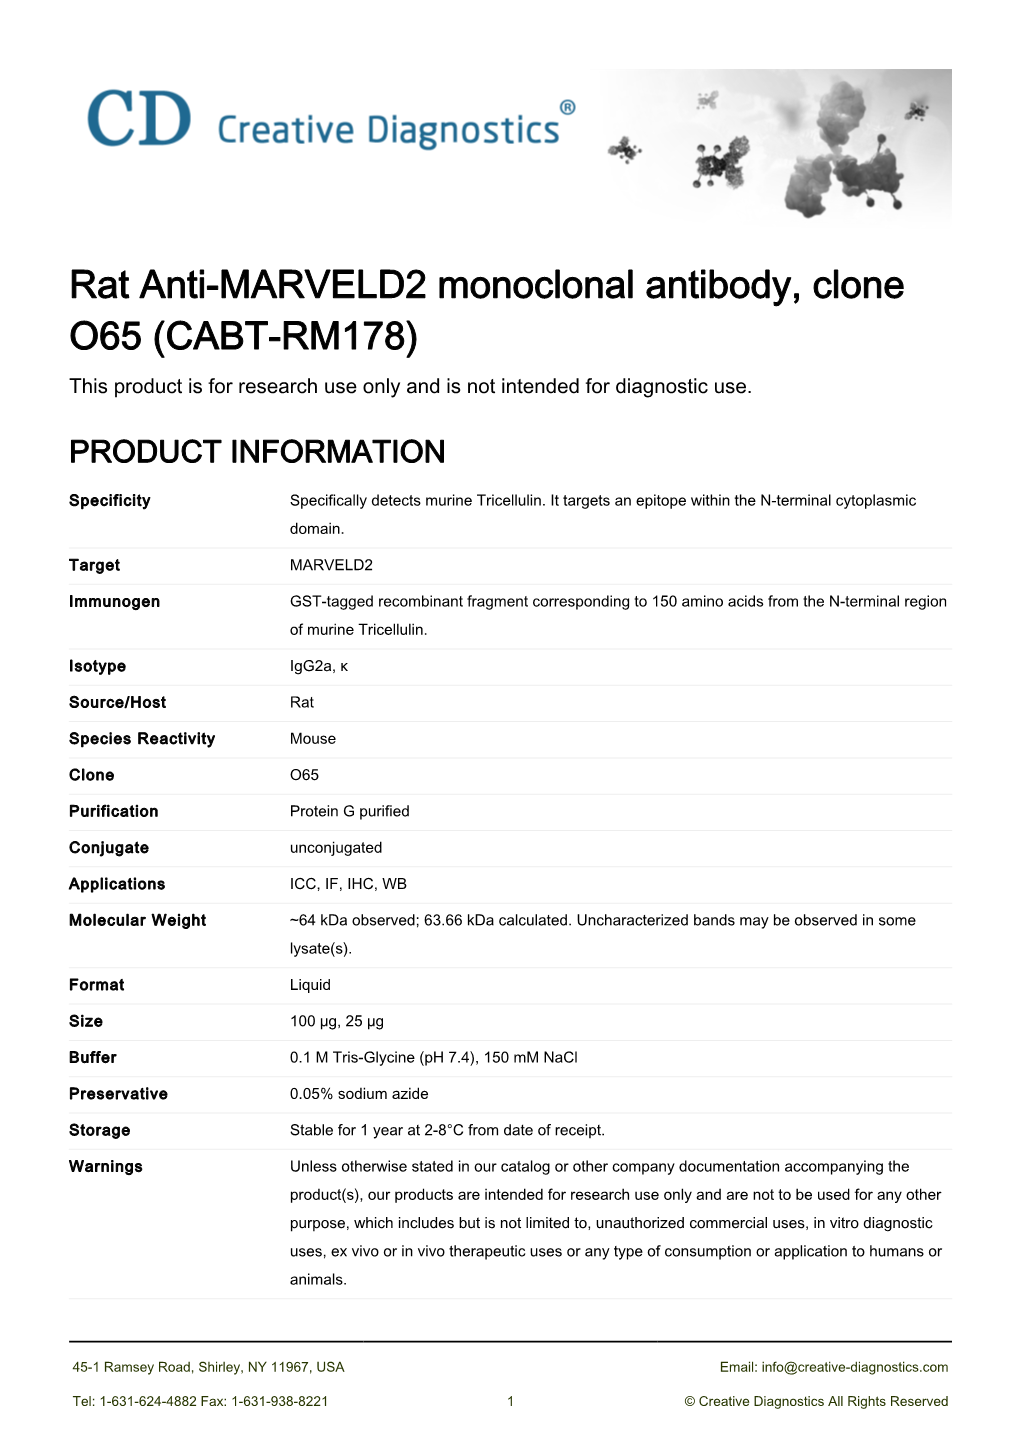 Rat Anti-MARVELD2 Monoclonal Antibody, Clone O65 (CABT-RM178) This Product Is for Research Use Only and Is Not Intended for Diagnostic Use